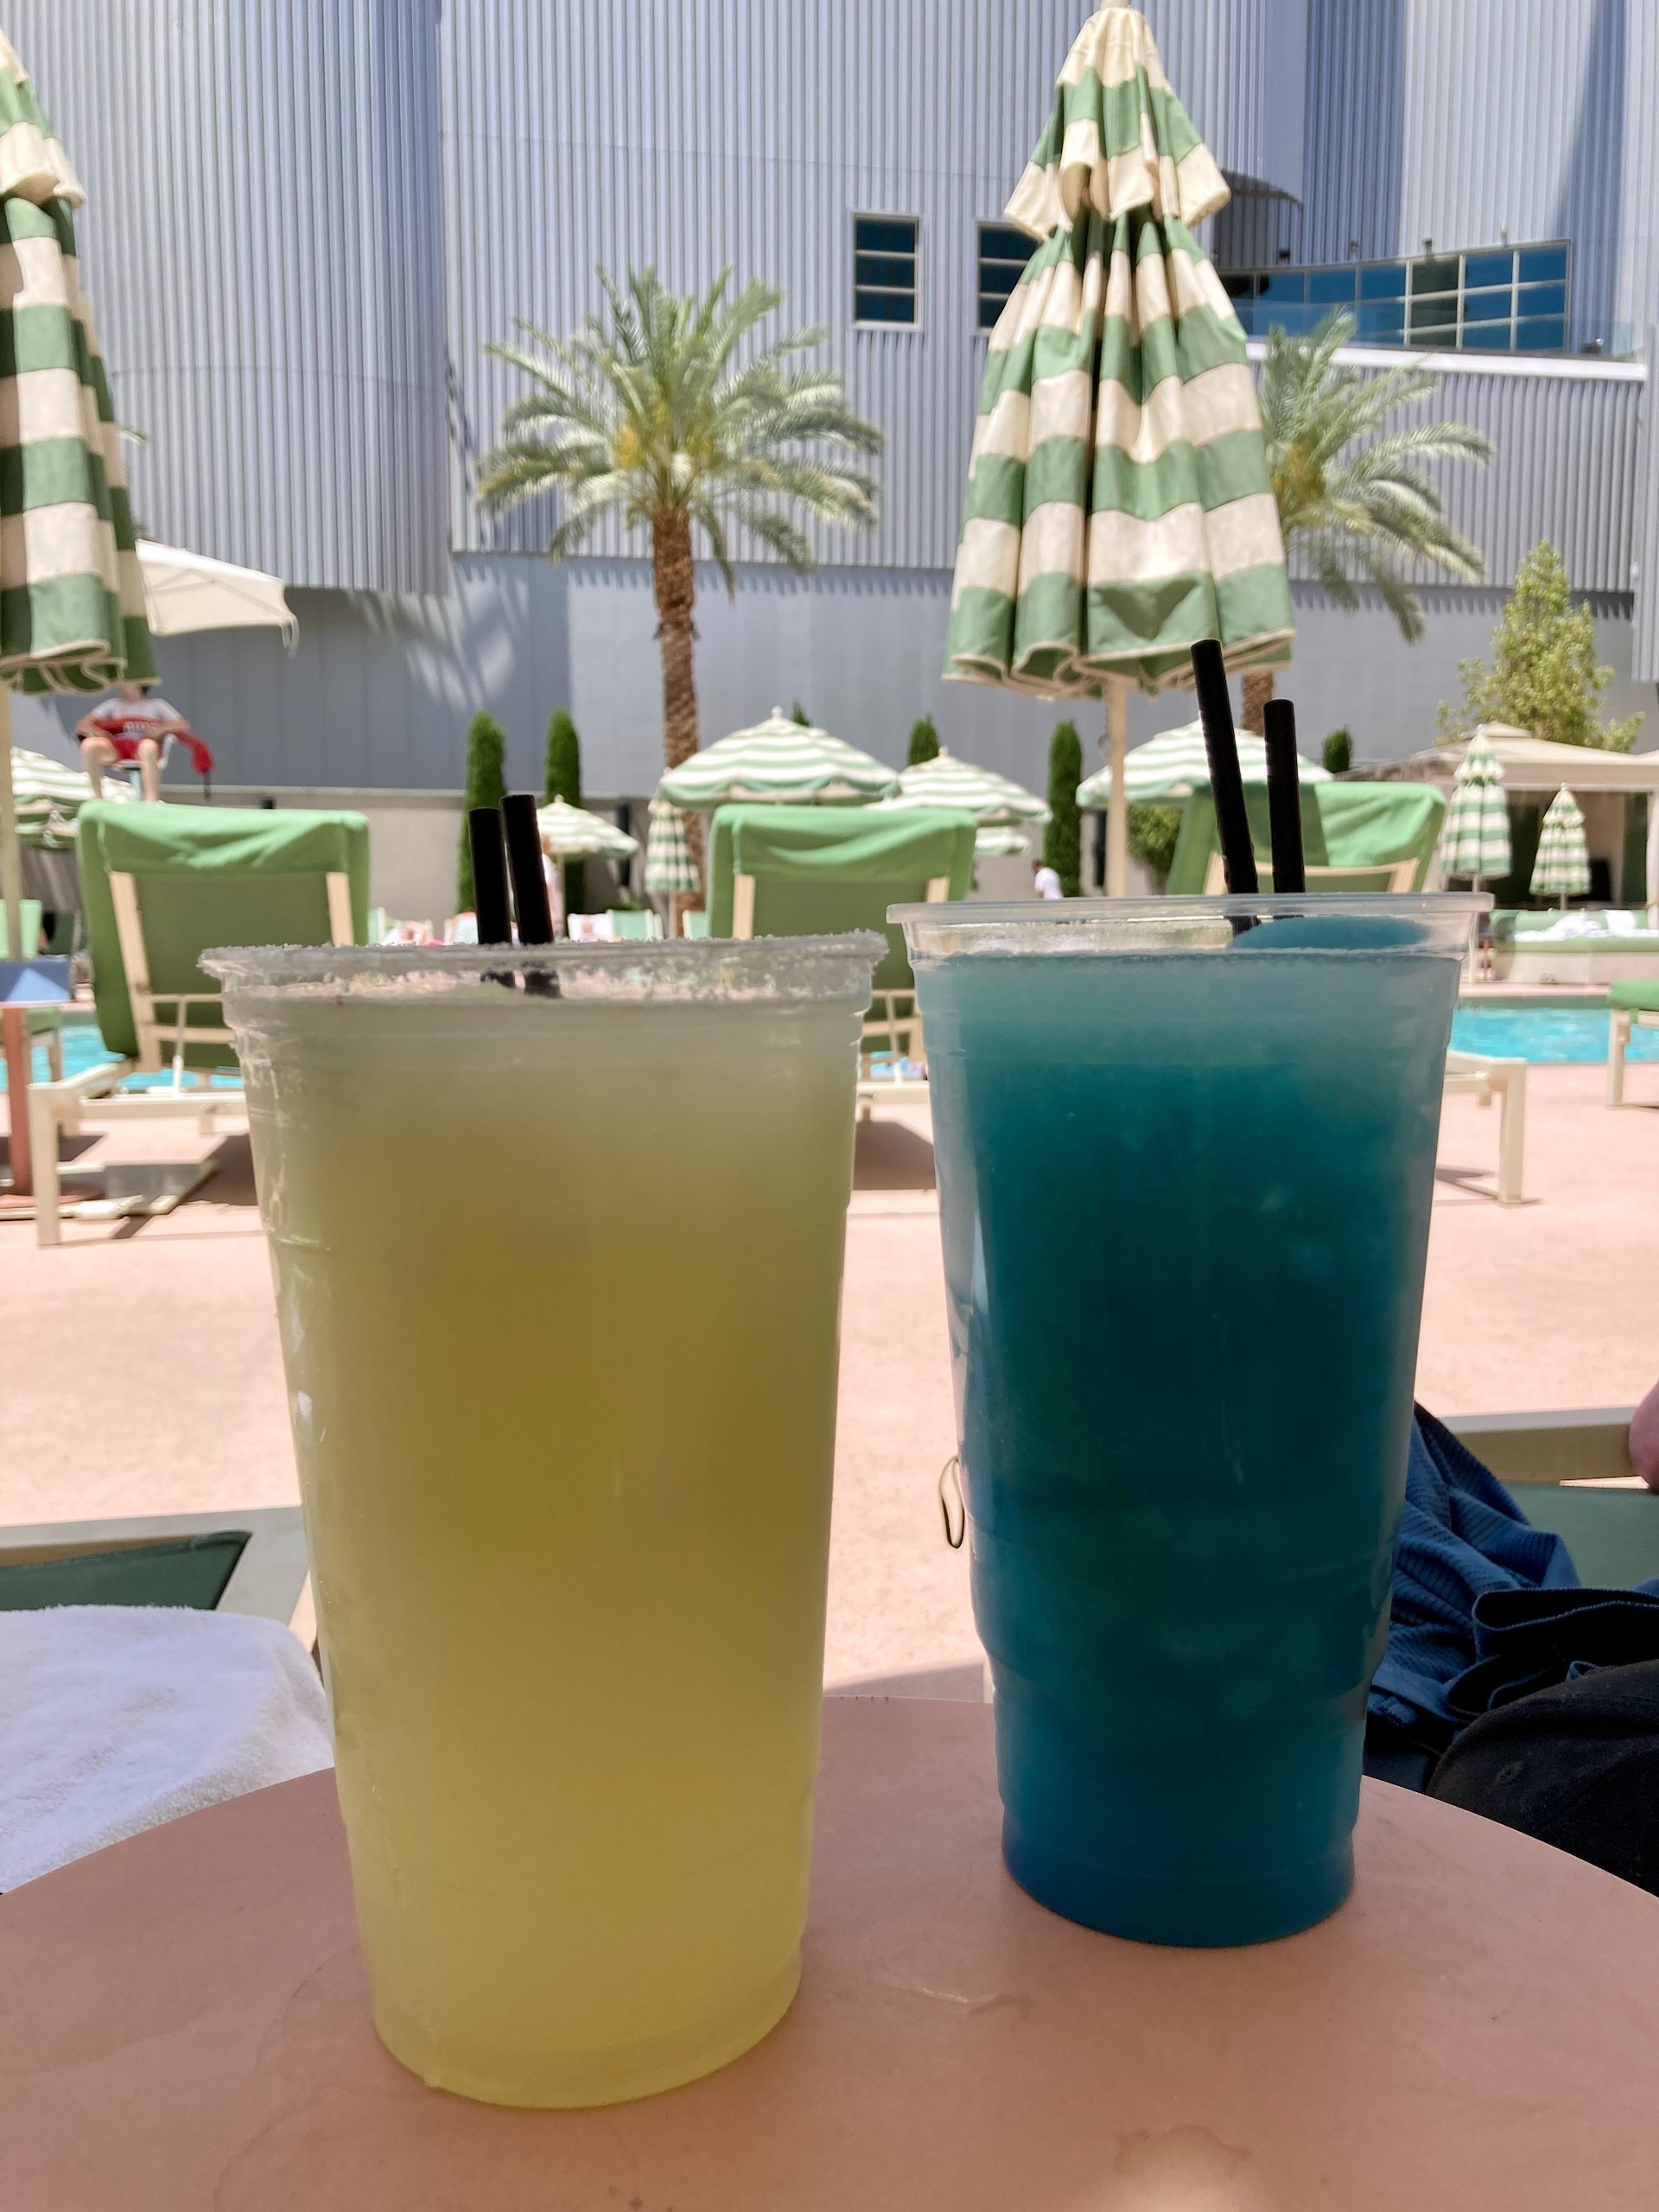  We switched to slushy drinks one day. 32 oz - they were huge (and strong!). 